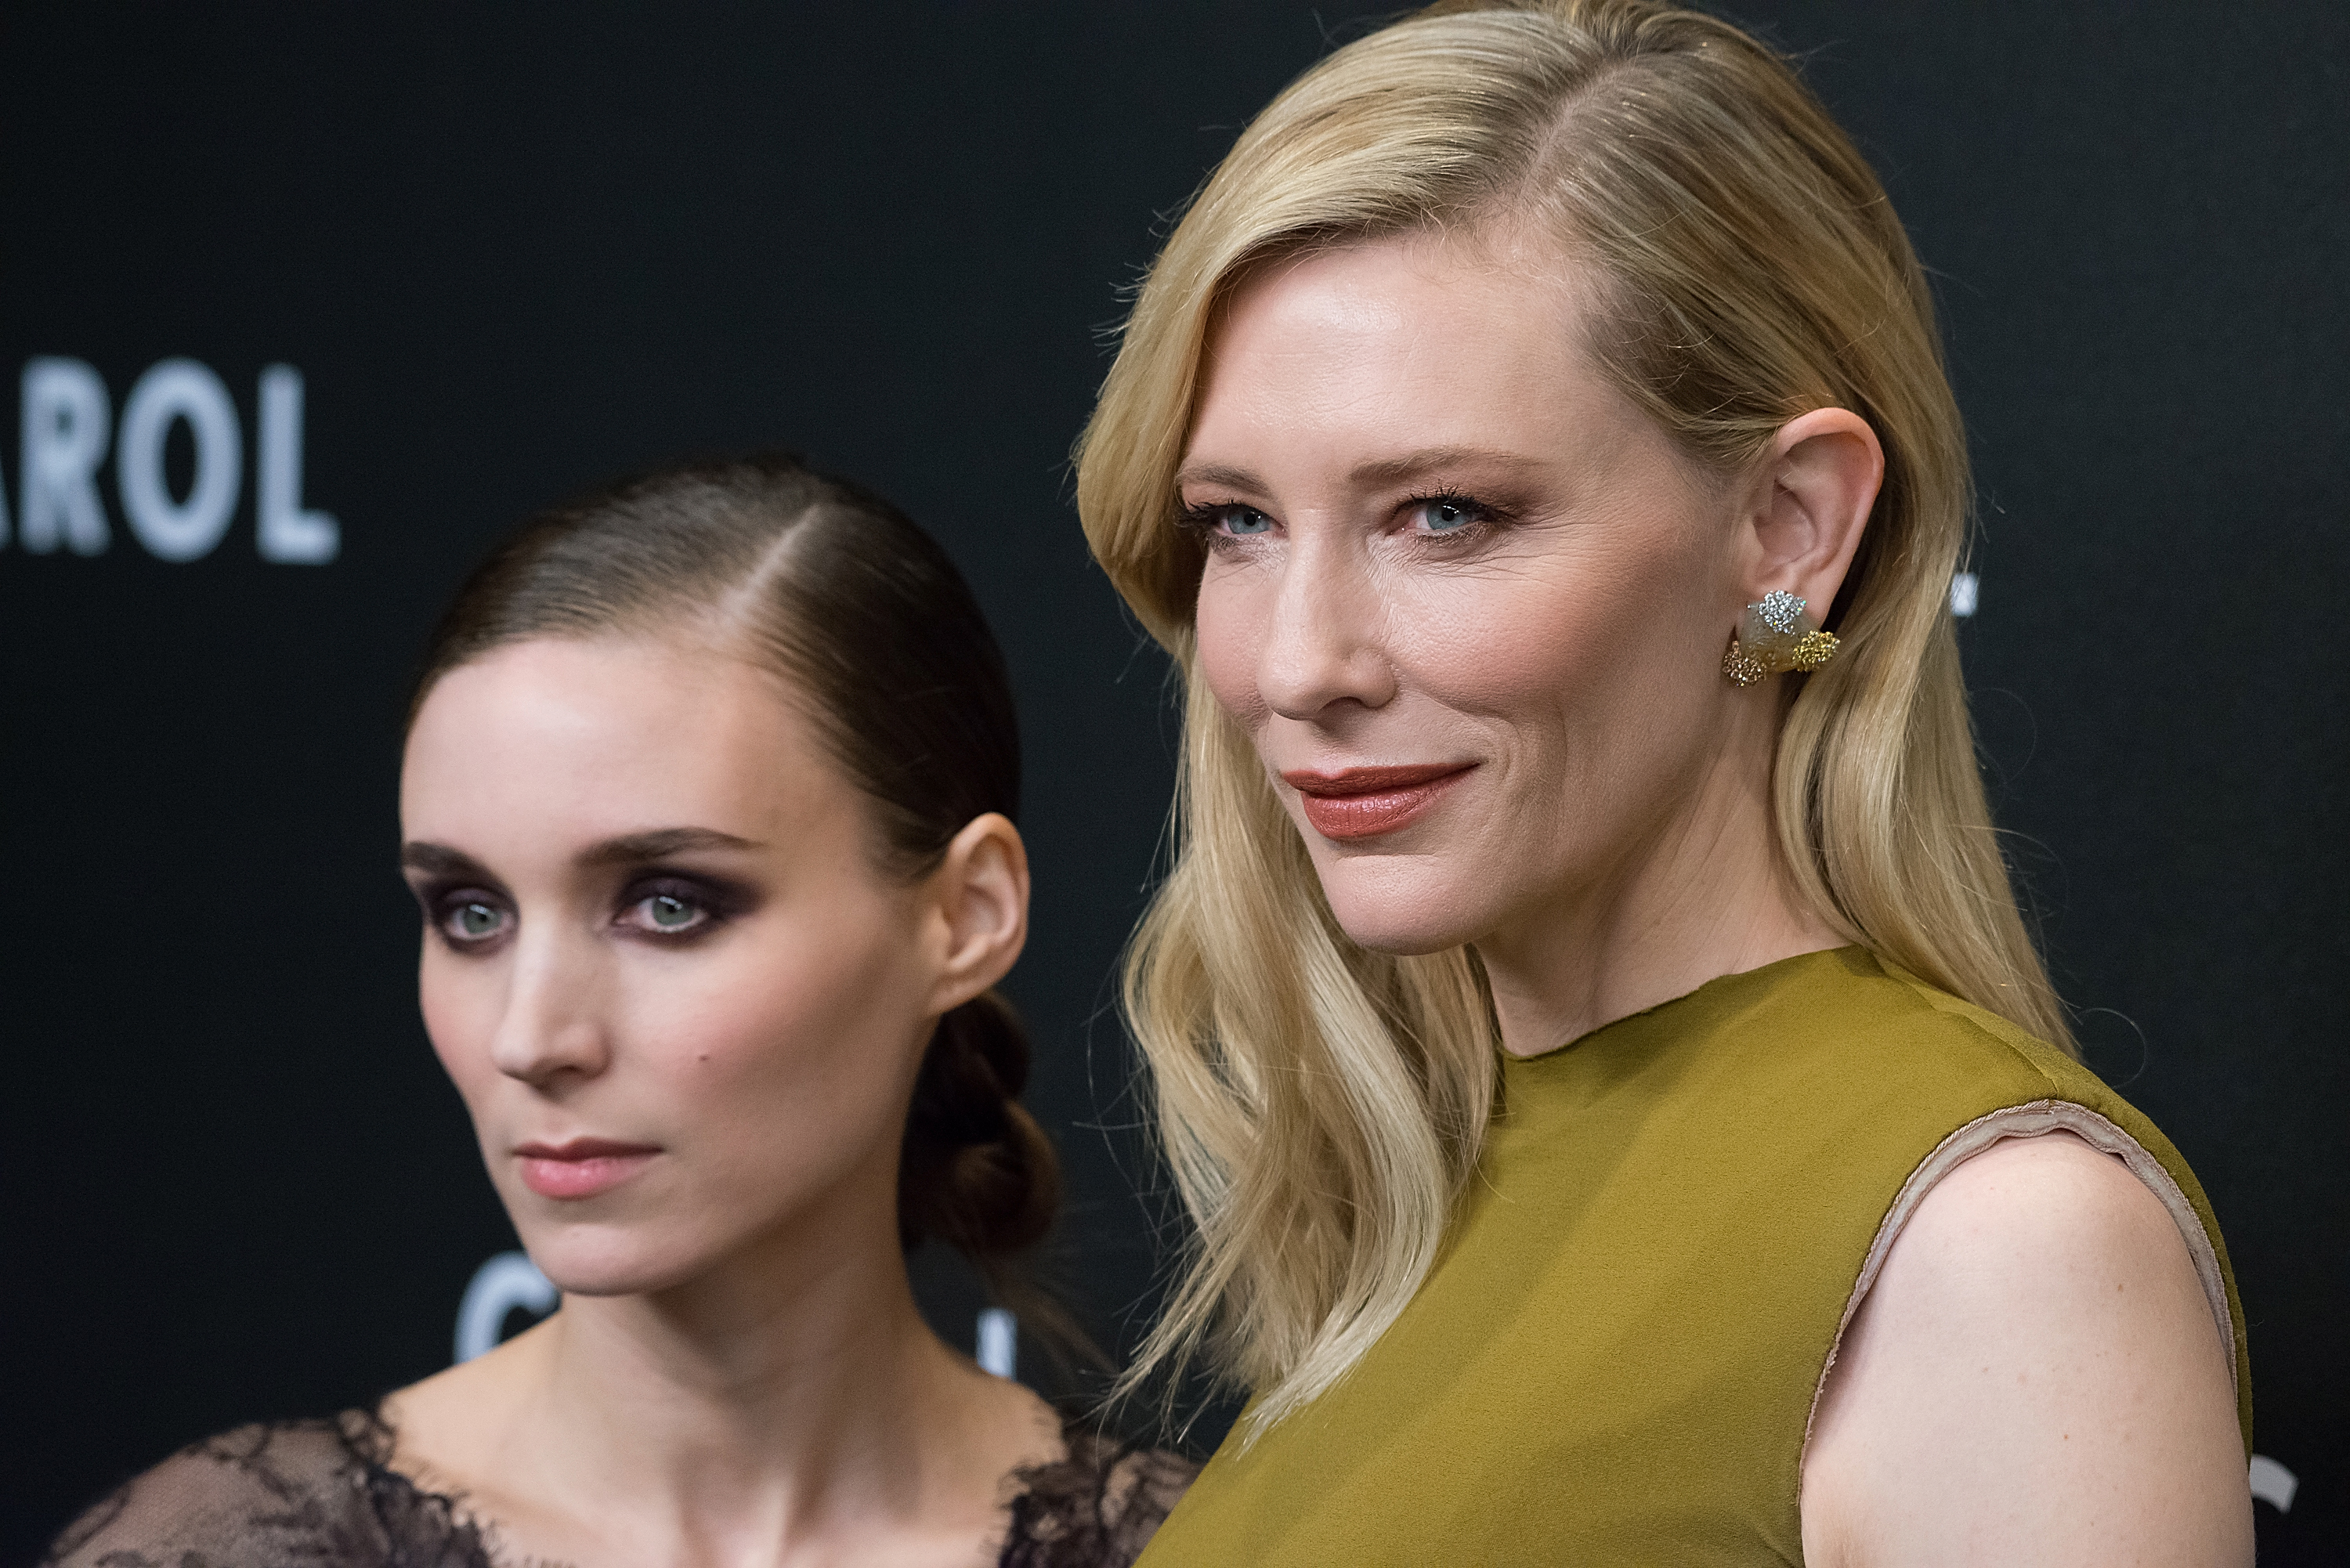 Rooney Mara, left and Cate Blanchett at Museum of Modern Art on Nov. 16, 2015 in New York City. (Michael Stewart—WireImage/Getty Images)